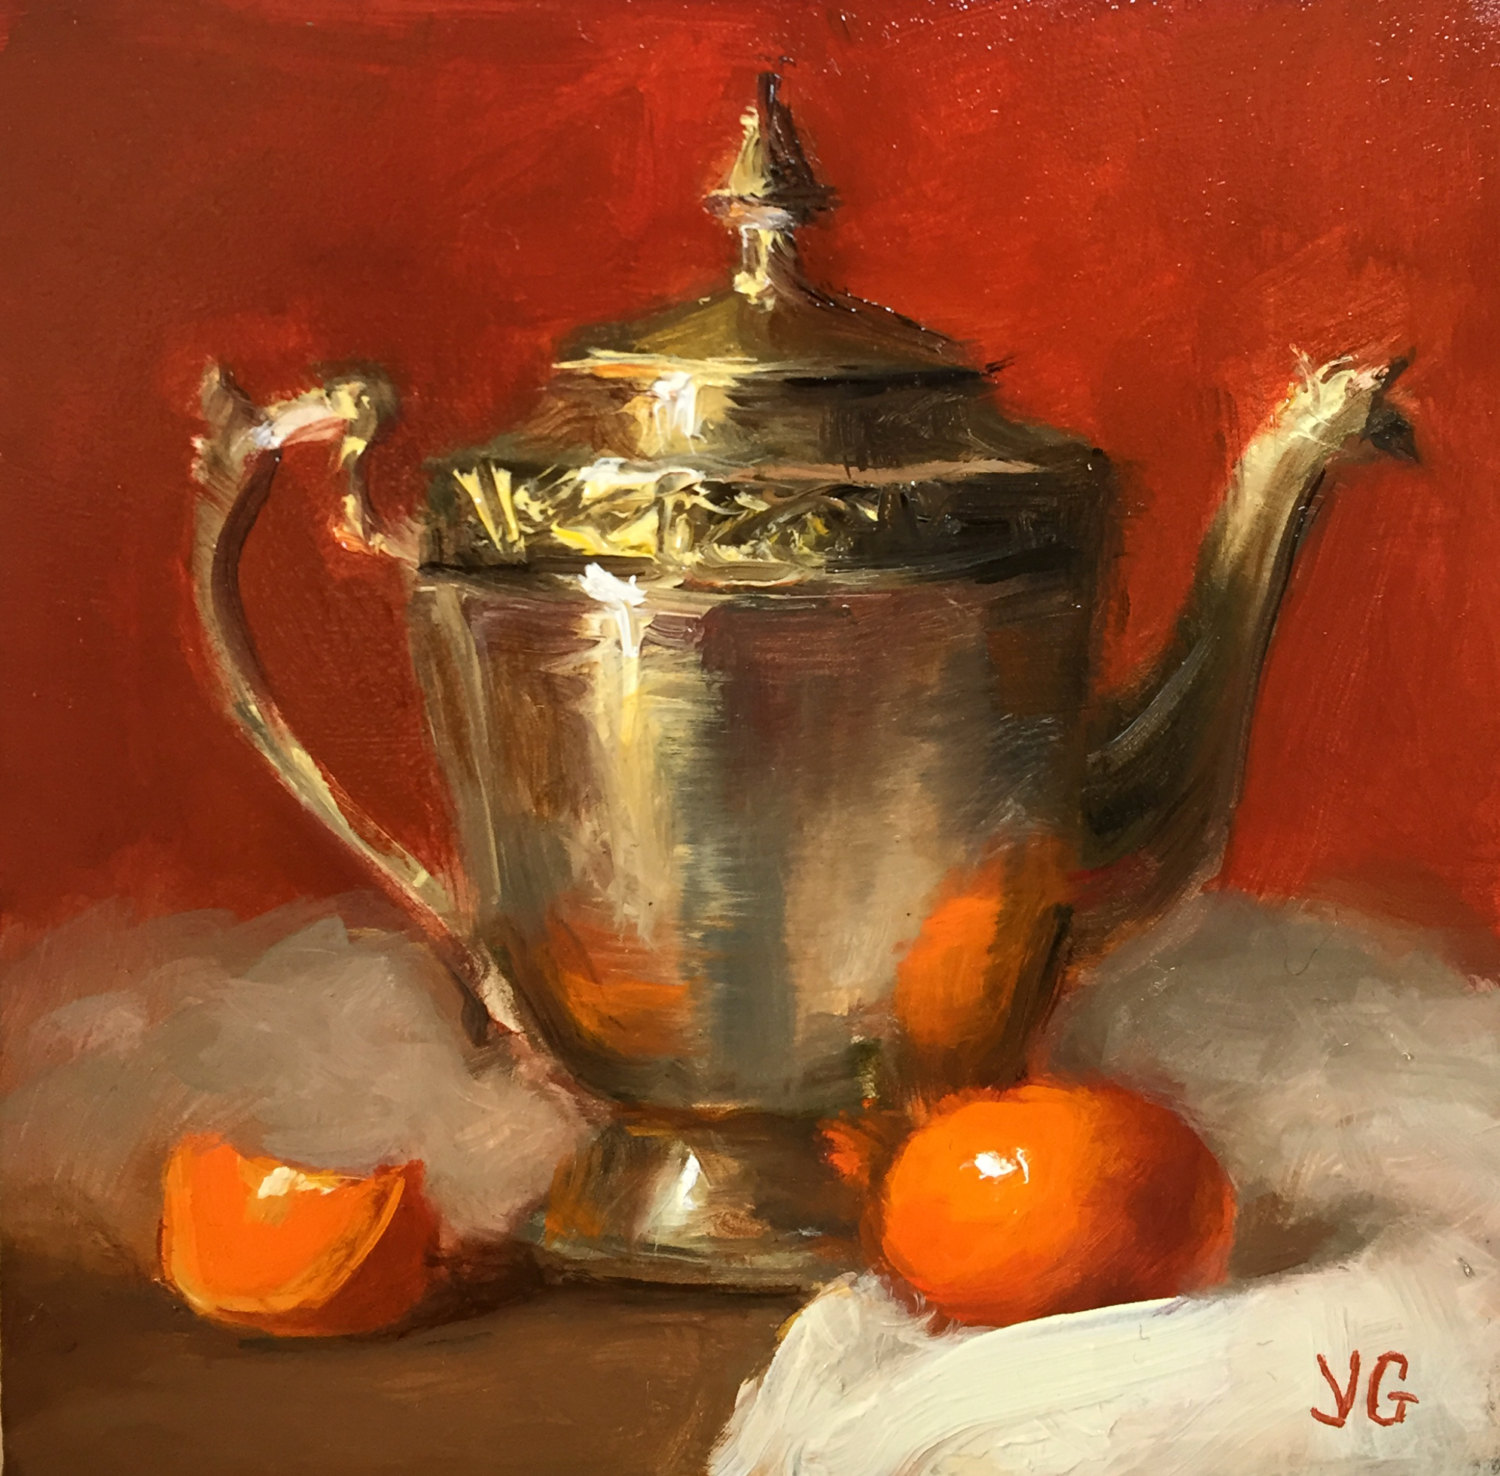 Metal Pitcher and Mandarins 5x5 Oil on board